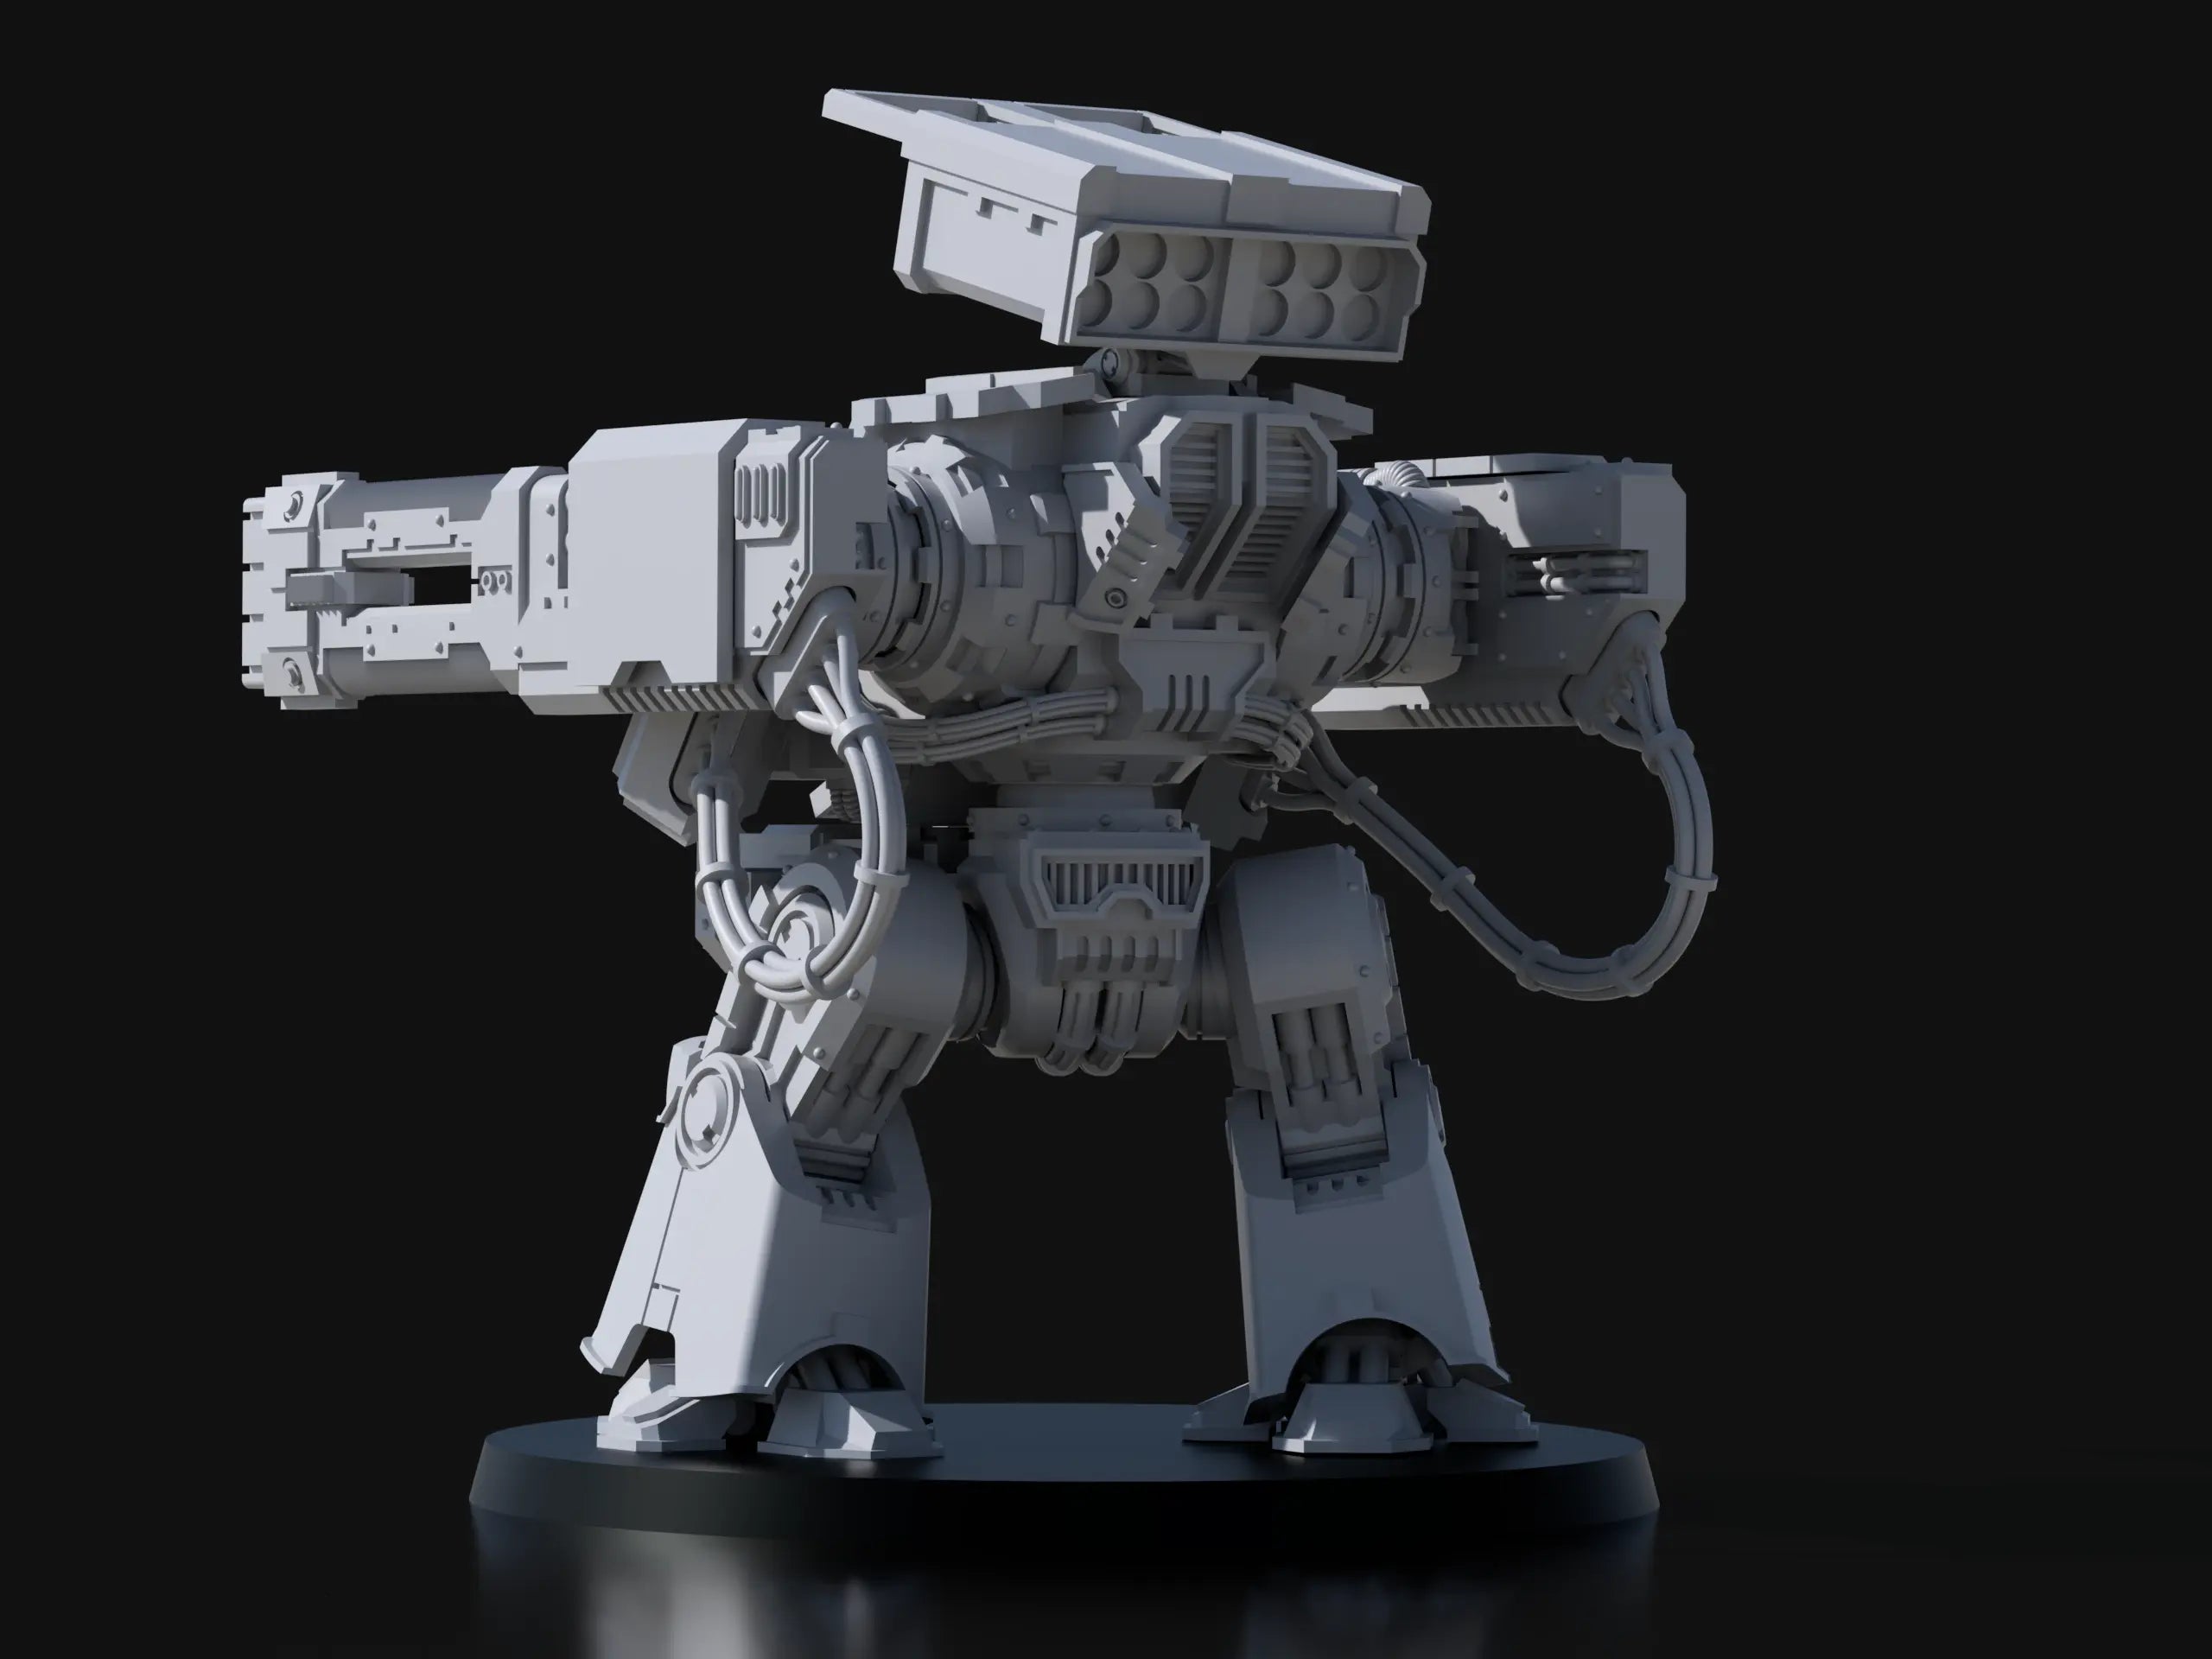 Aximus Weapons Platform Dreadnought - Laserforge Miniatures